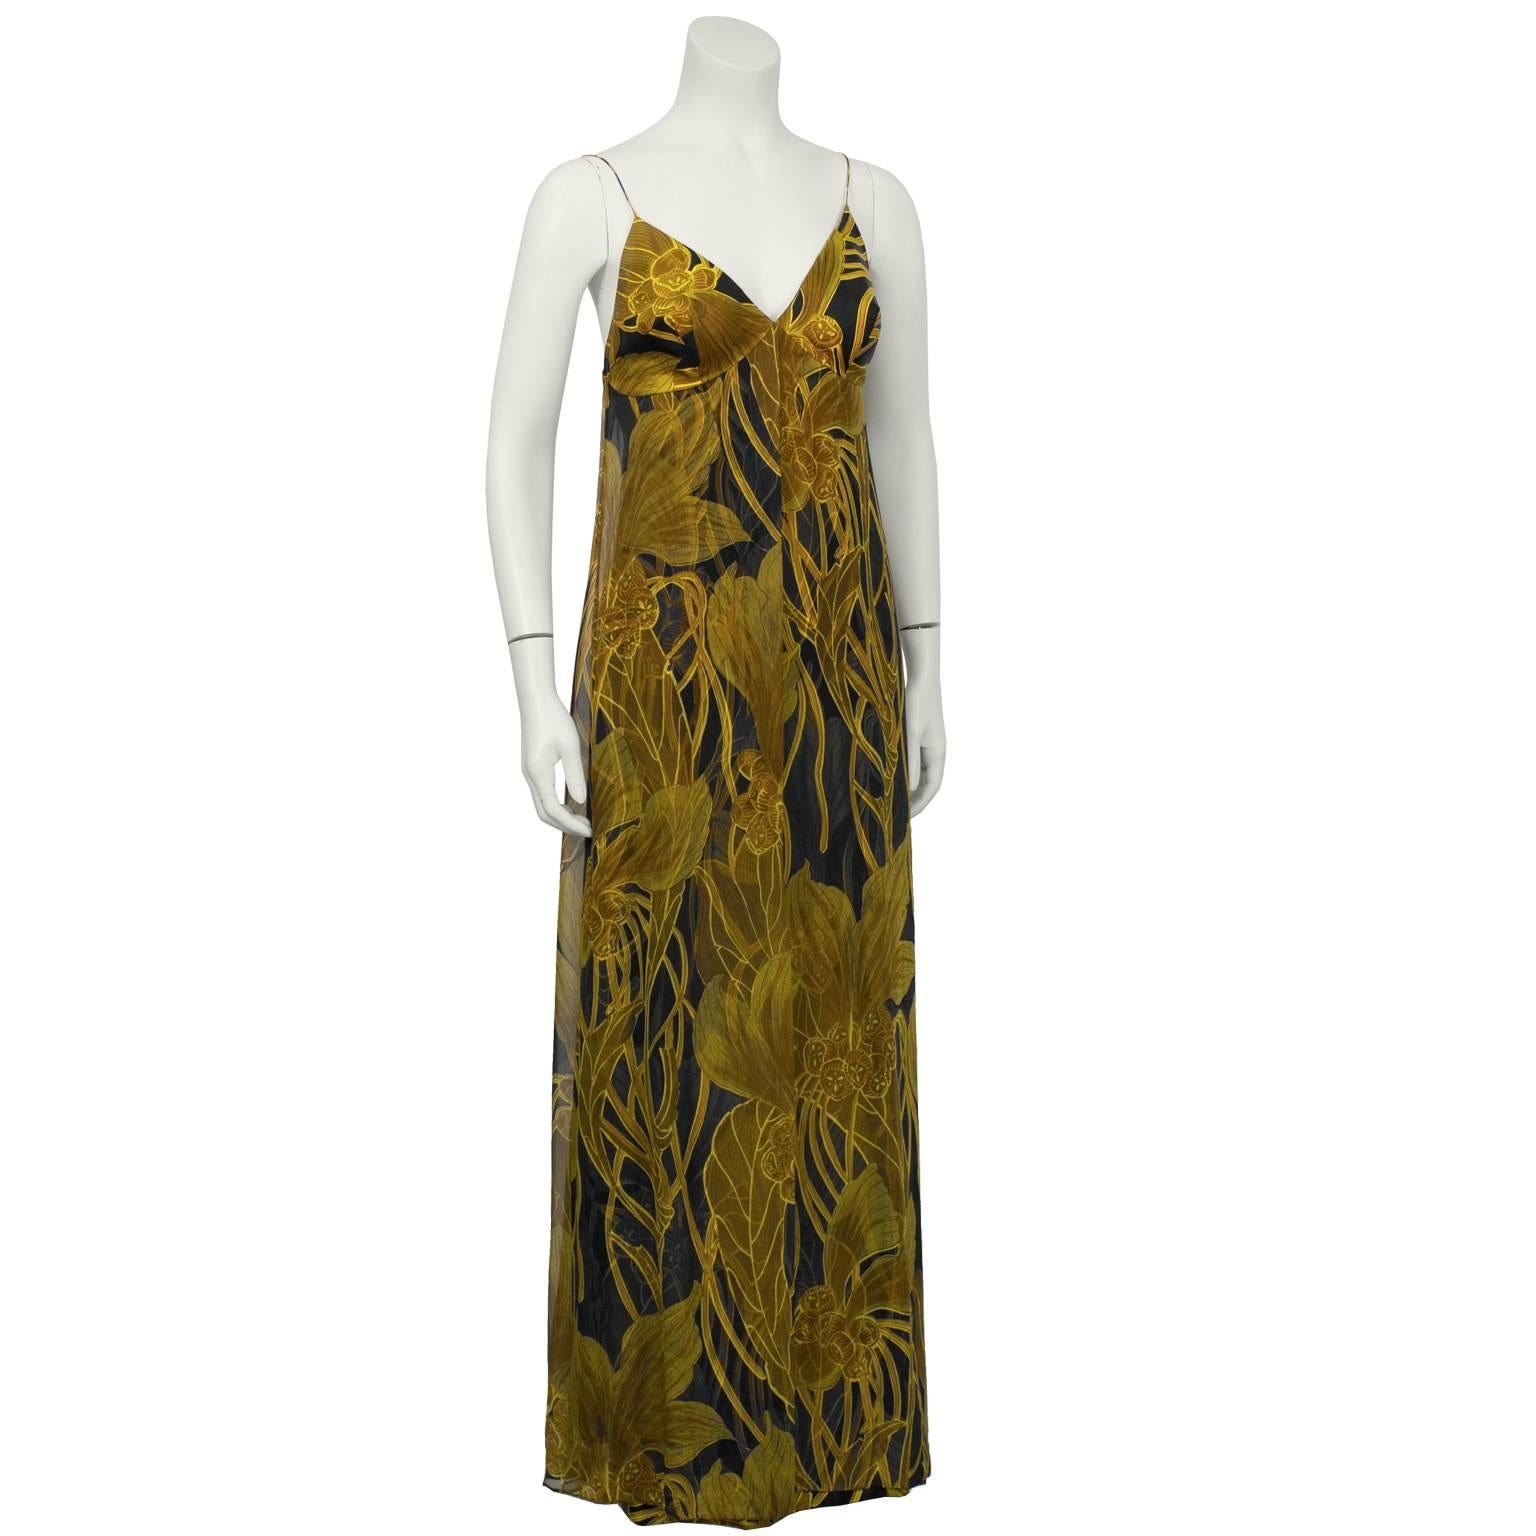 1970's Saks Fifth Ave. brown, gold, and black floral silk and chiffon printed evening gown with matching stole. The spaghetti strap and V-neckline column style gown features a chiffon layer that cascades down from the bustline. The fitted silk